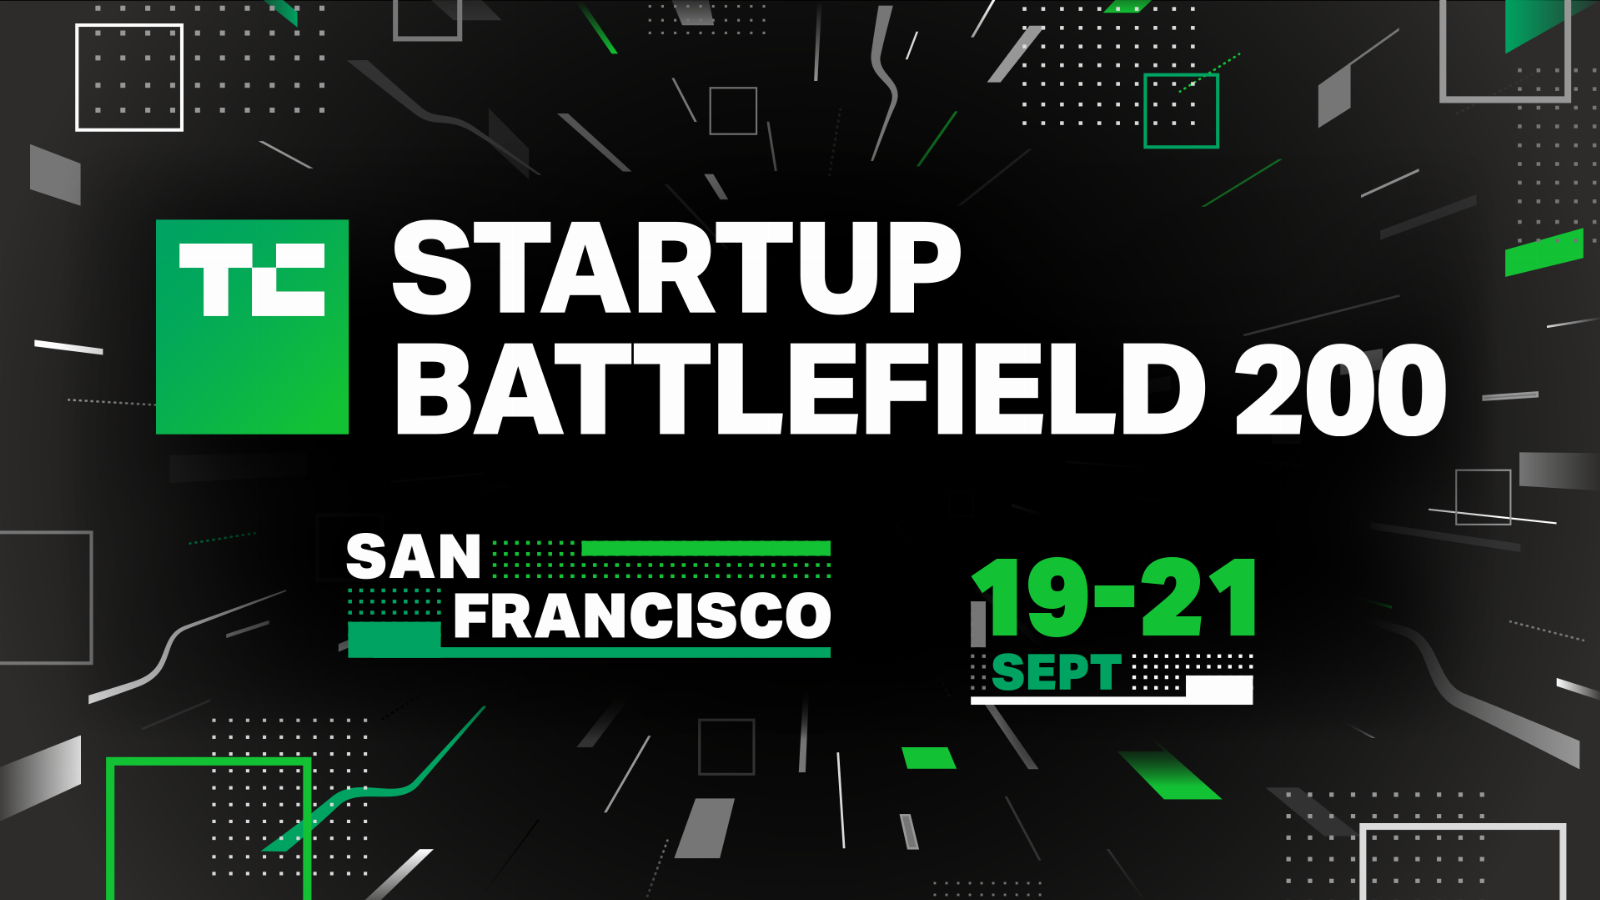 Don’t miss your last chance to pitch on the TC Disrupt stage